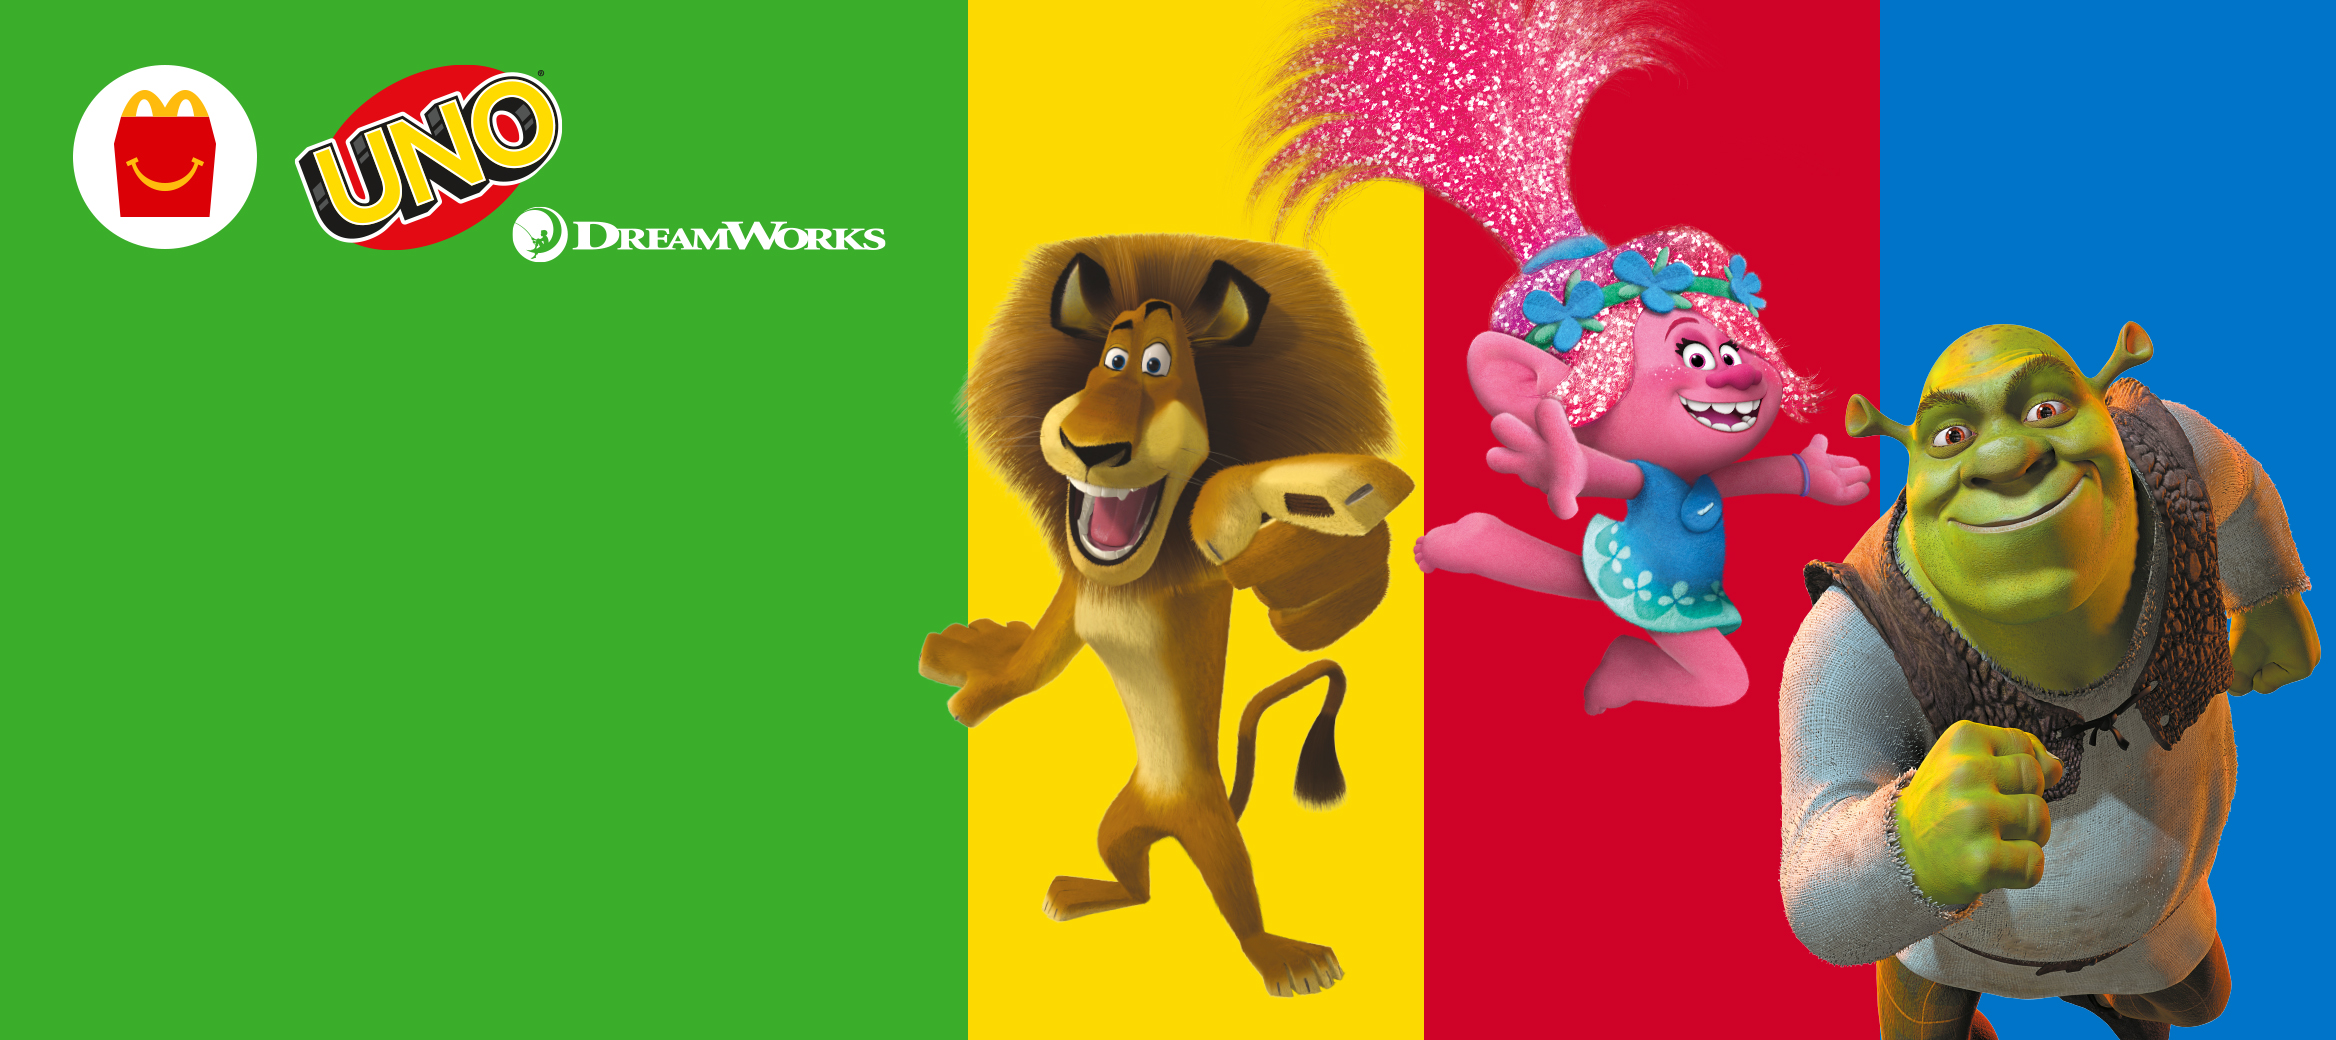  Dreamwork characters on a green, yellow, red, and blue striped  background